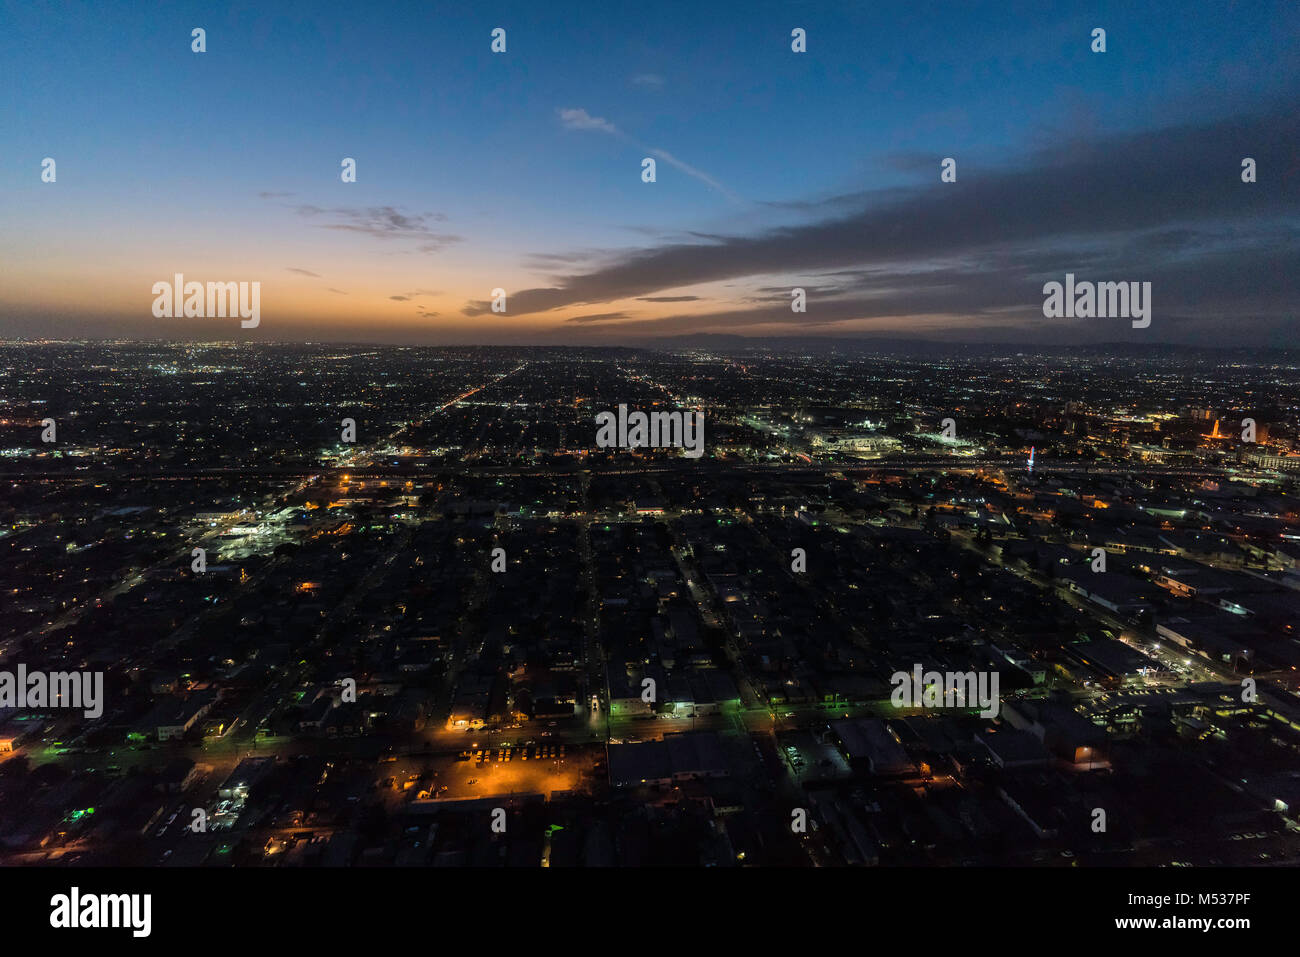 Night aerial view of buildings and streets in South Los Angeles California. Stock Photo